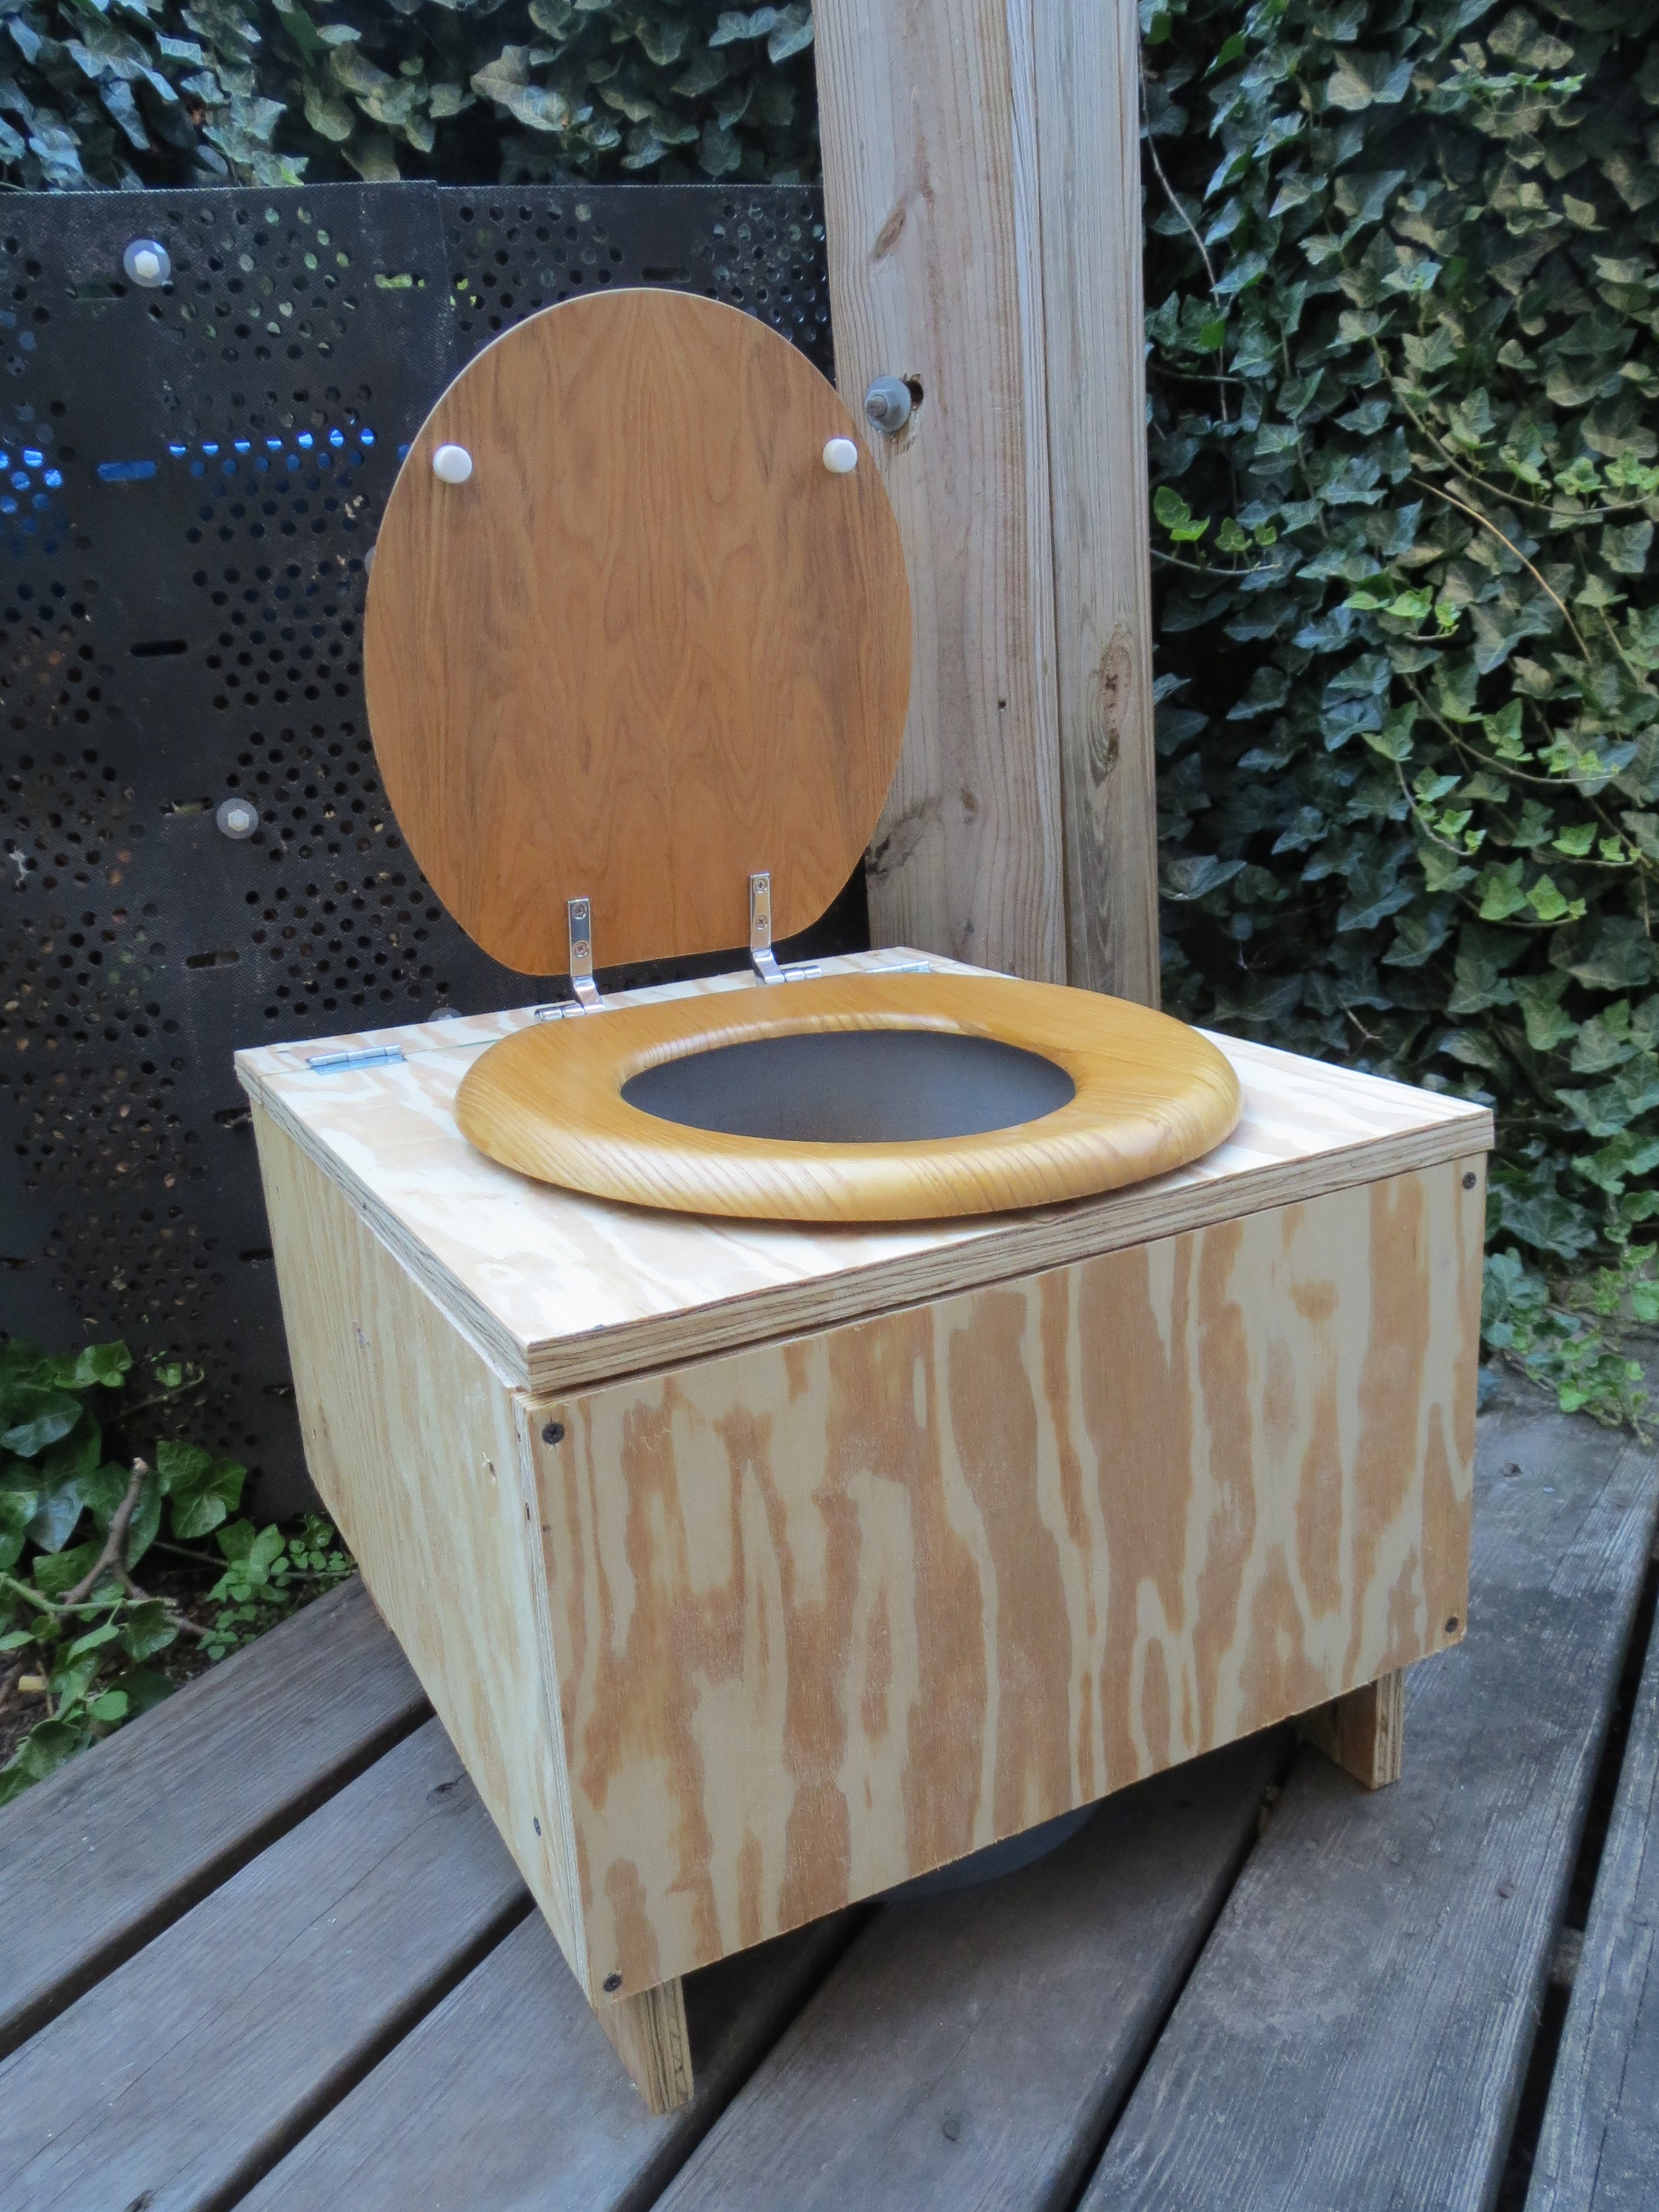 Creating Effective and Practical Composting Toilets – 101 Ways to Survive